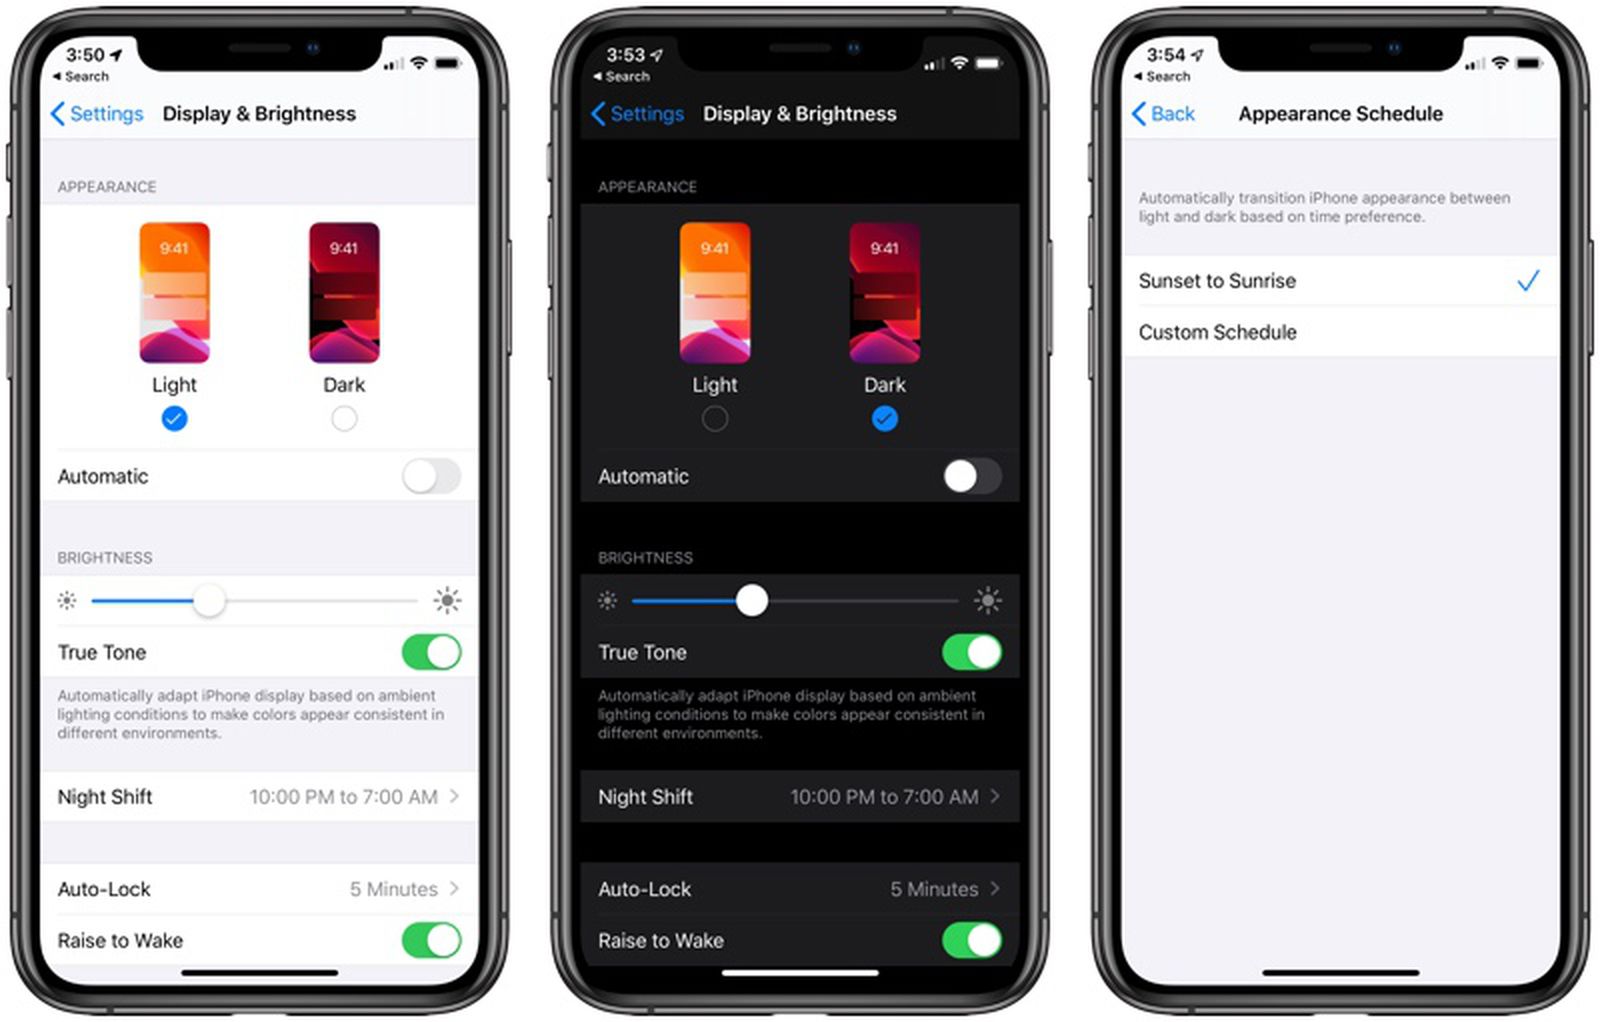 How to Use Night Mode on iPhone: Dark Mode in iOS